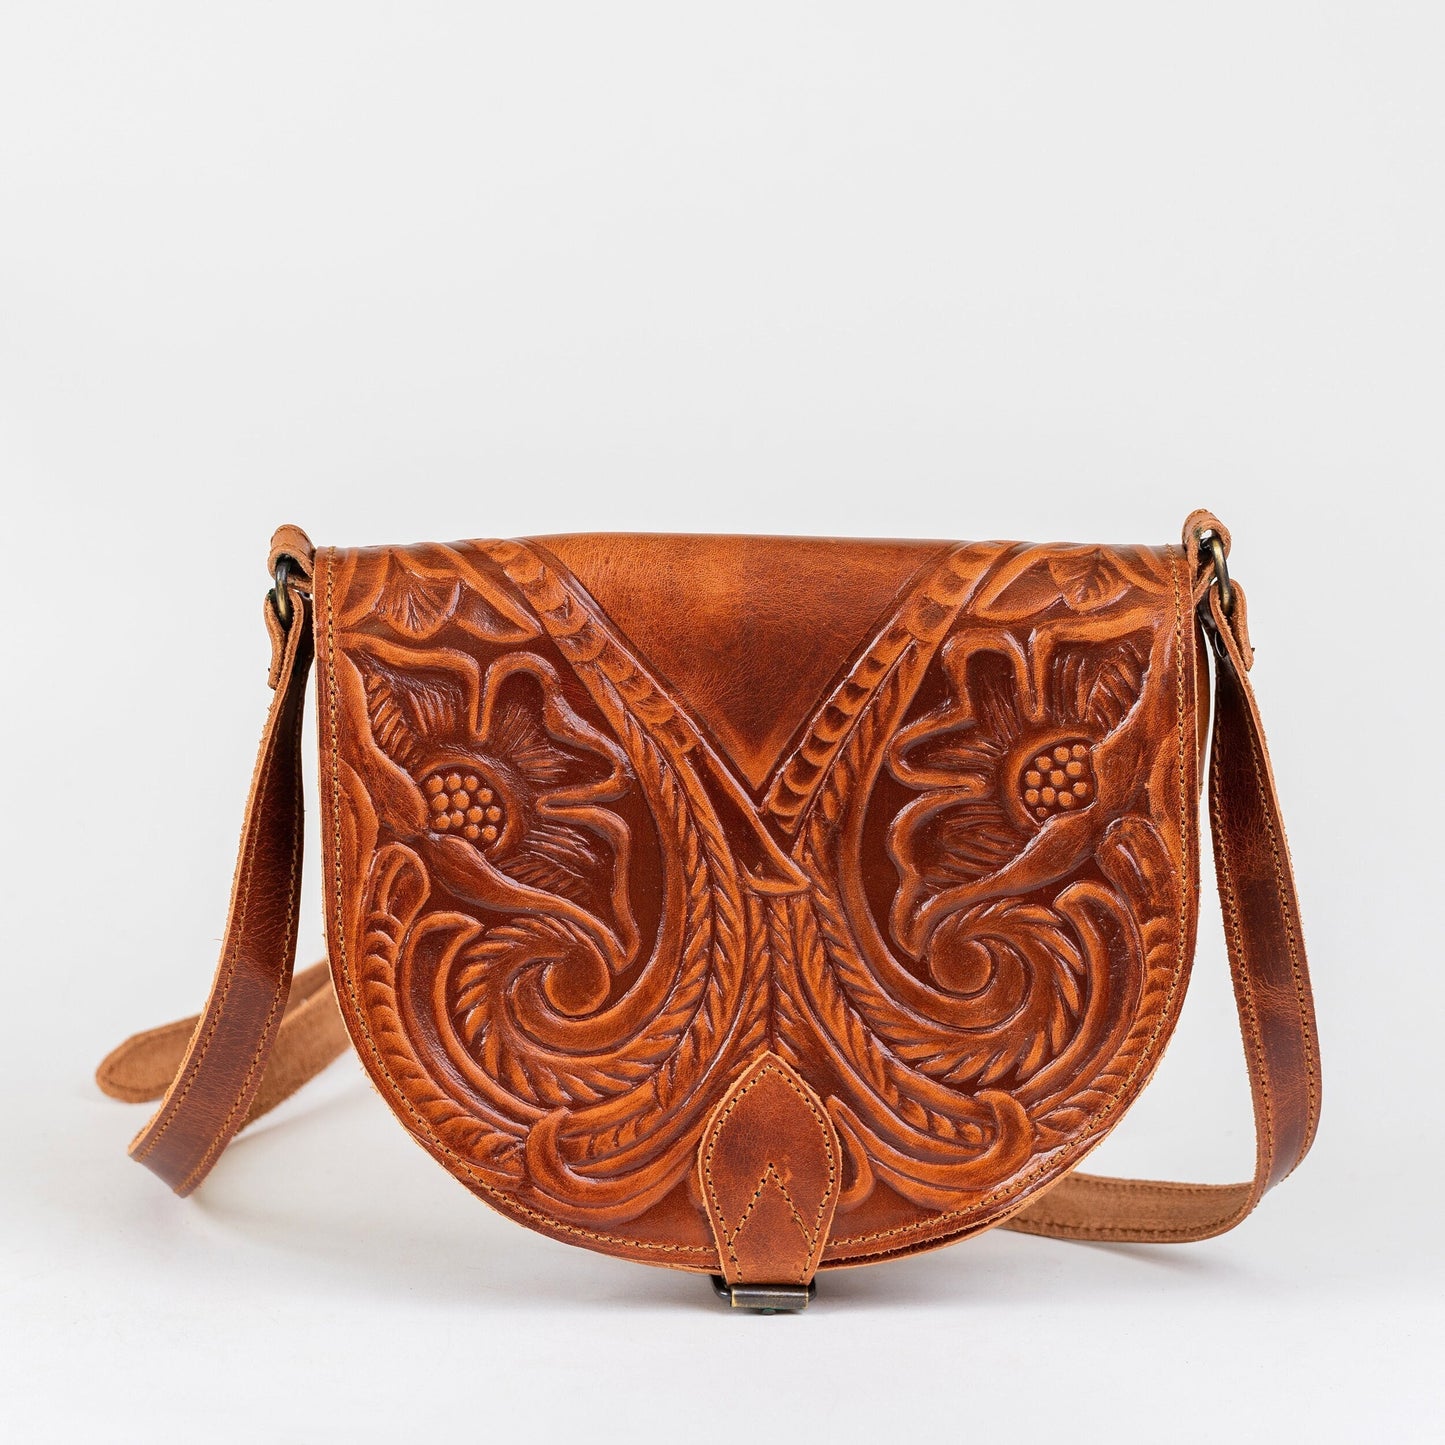 Vintage tooled leather purse, Brown tooled leather purse for women, Crossbody leather bag, Hand tooled leather purse